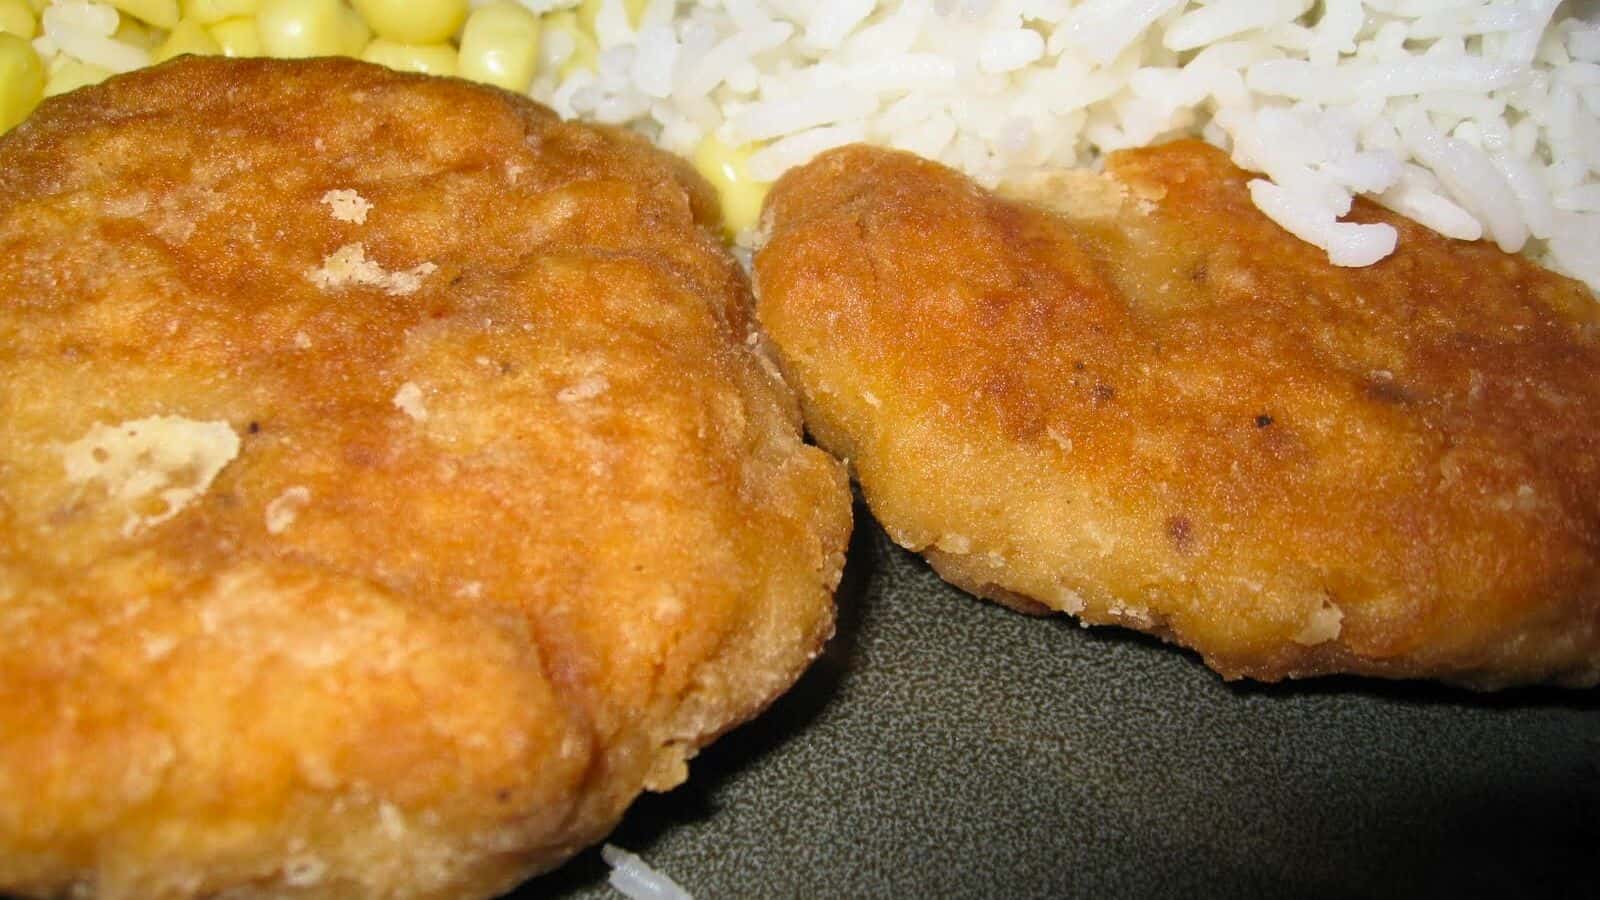 Image shows two Salmon Patties on a green plate with rice and corn.